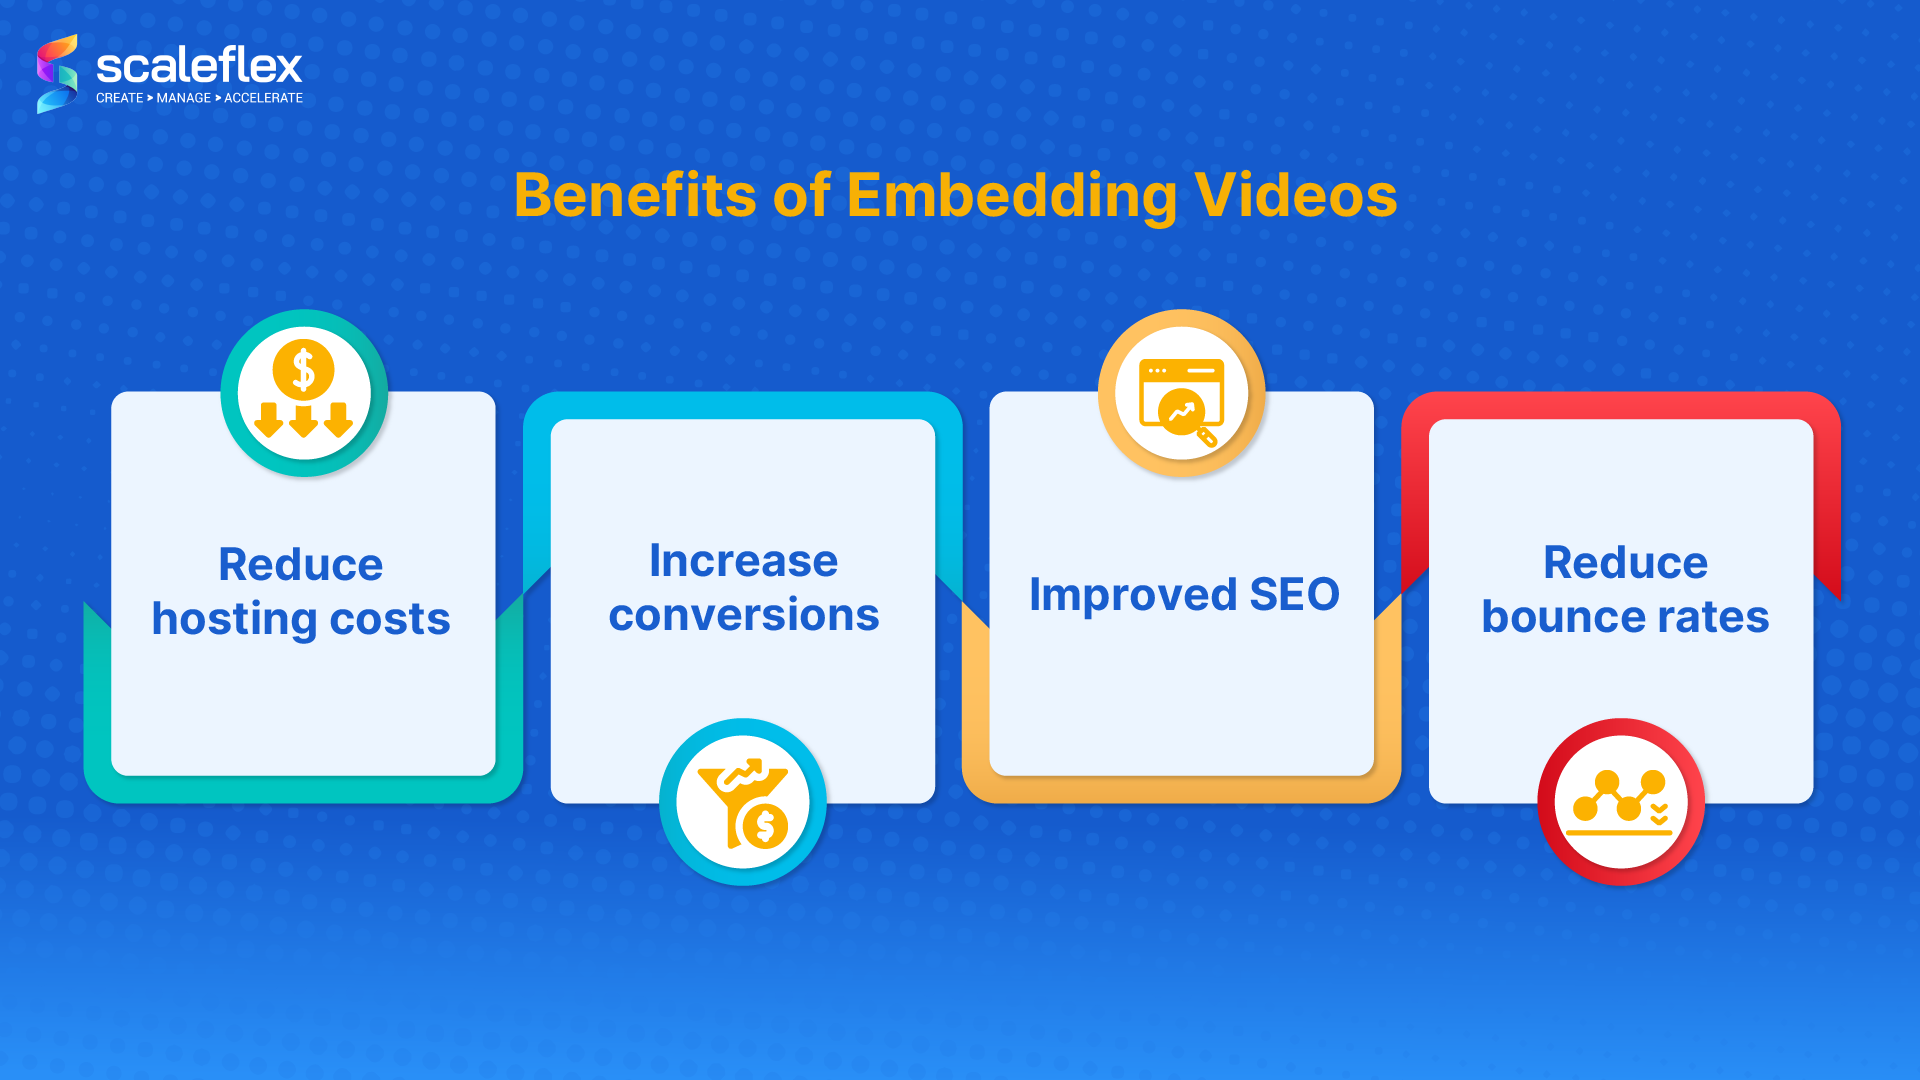 How To Embed A Video: 3 Best Methods And Their Benefits